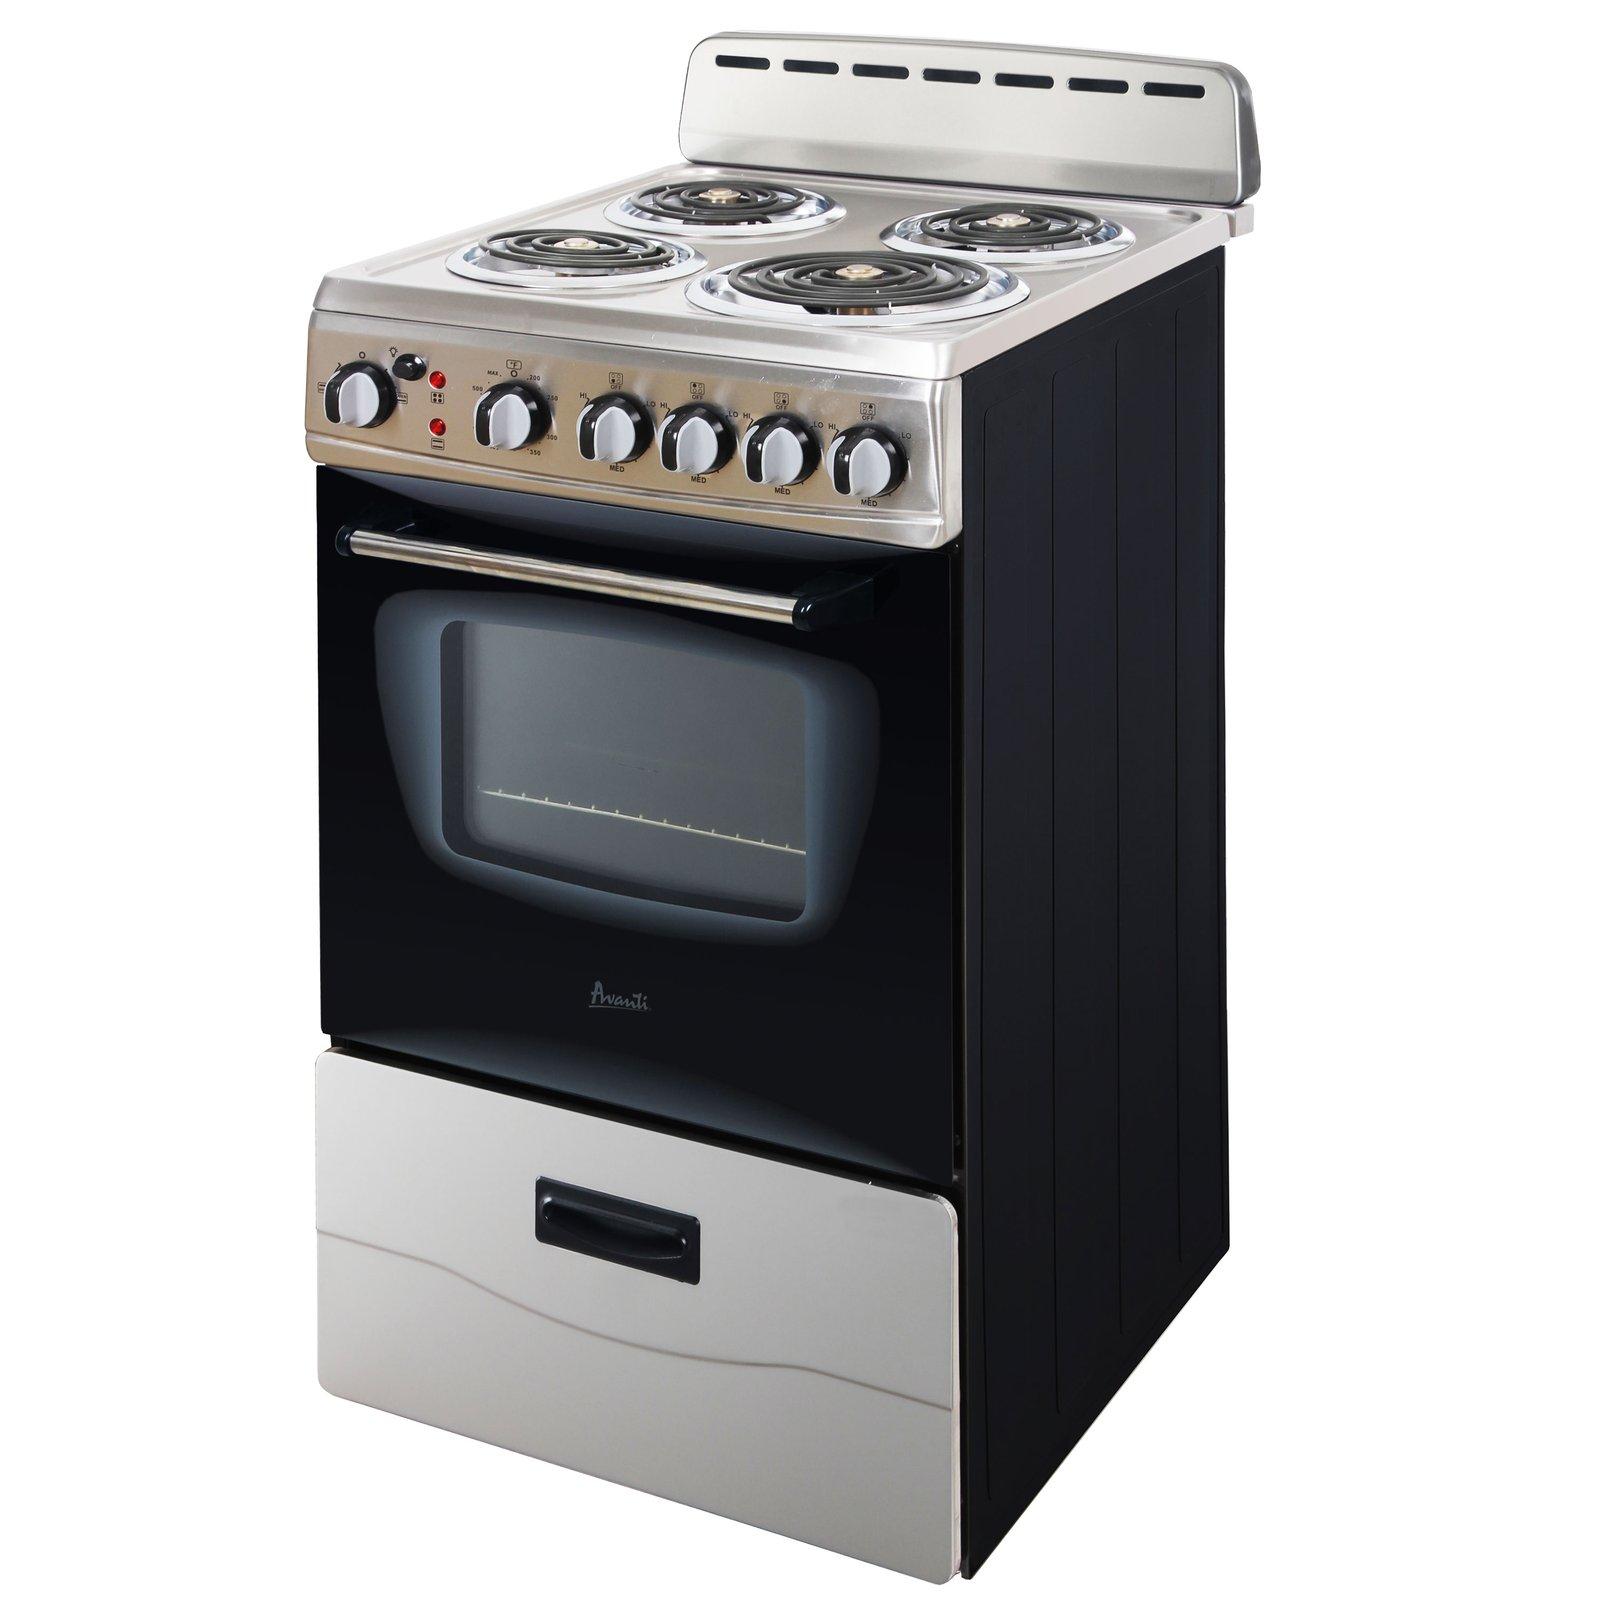 Avanti 20" Electric Range Oven with Framed Glass Door - White / 2.1 cu. ft.